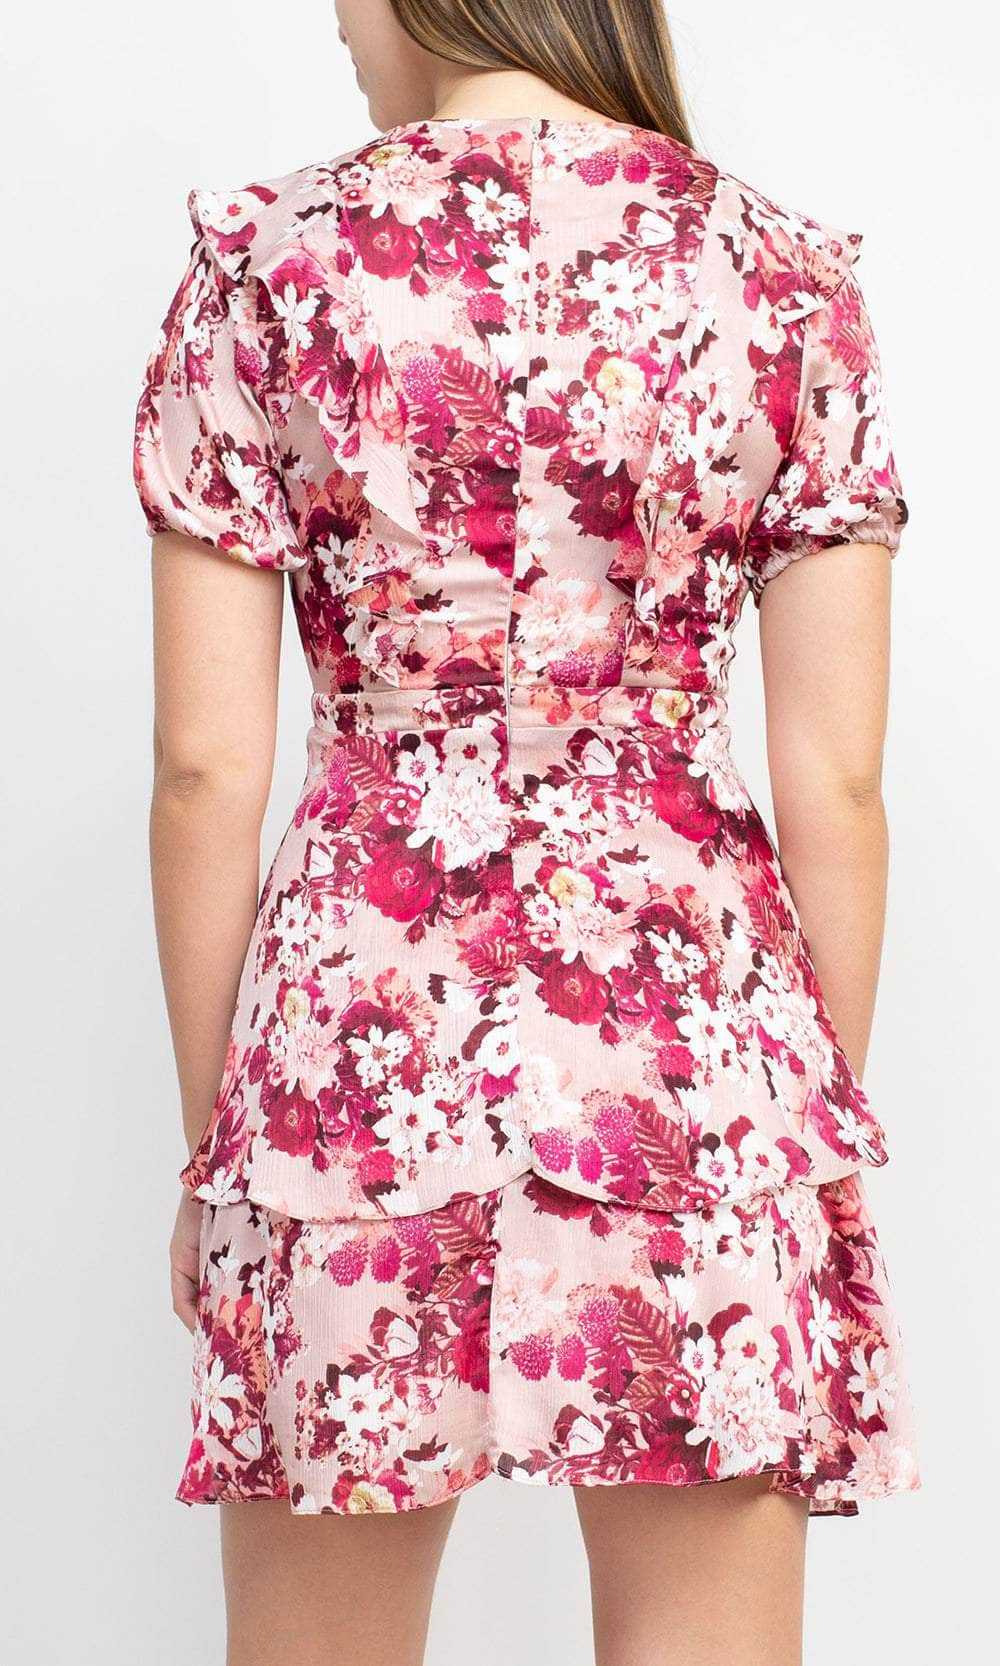 Sage Collective, Sage Collective SU07D11 - Ruffle Floral Short Dress